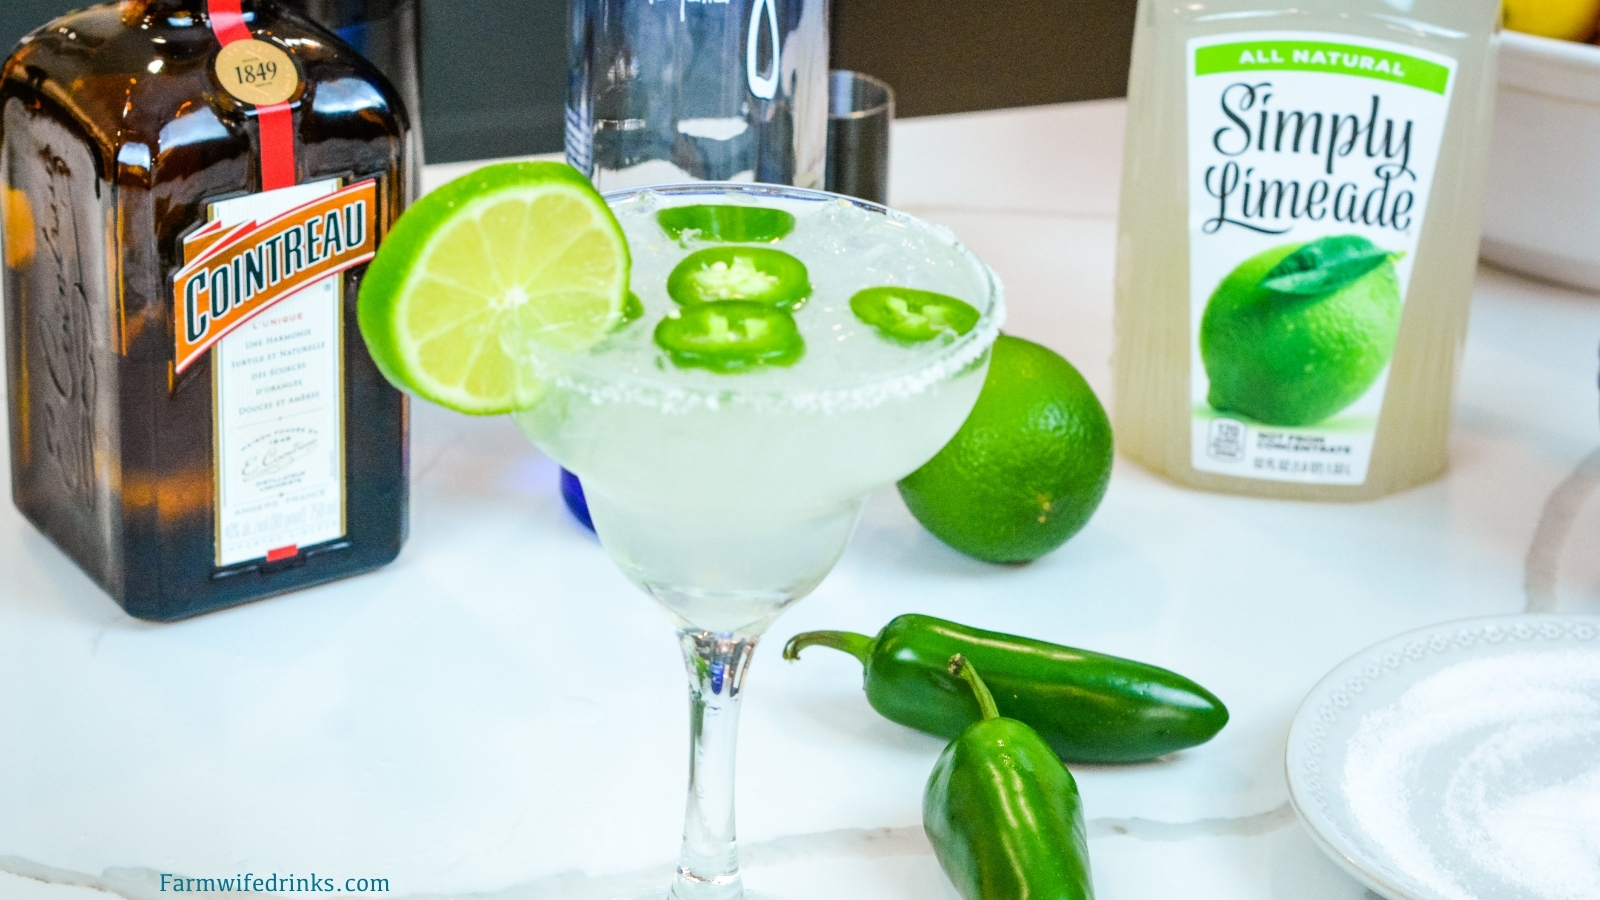 This spicy margarita does just that by combining a limeade, tequila, Cointreau with a bit of jalapeno for fresh jalapeno margaritas.